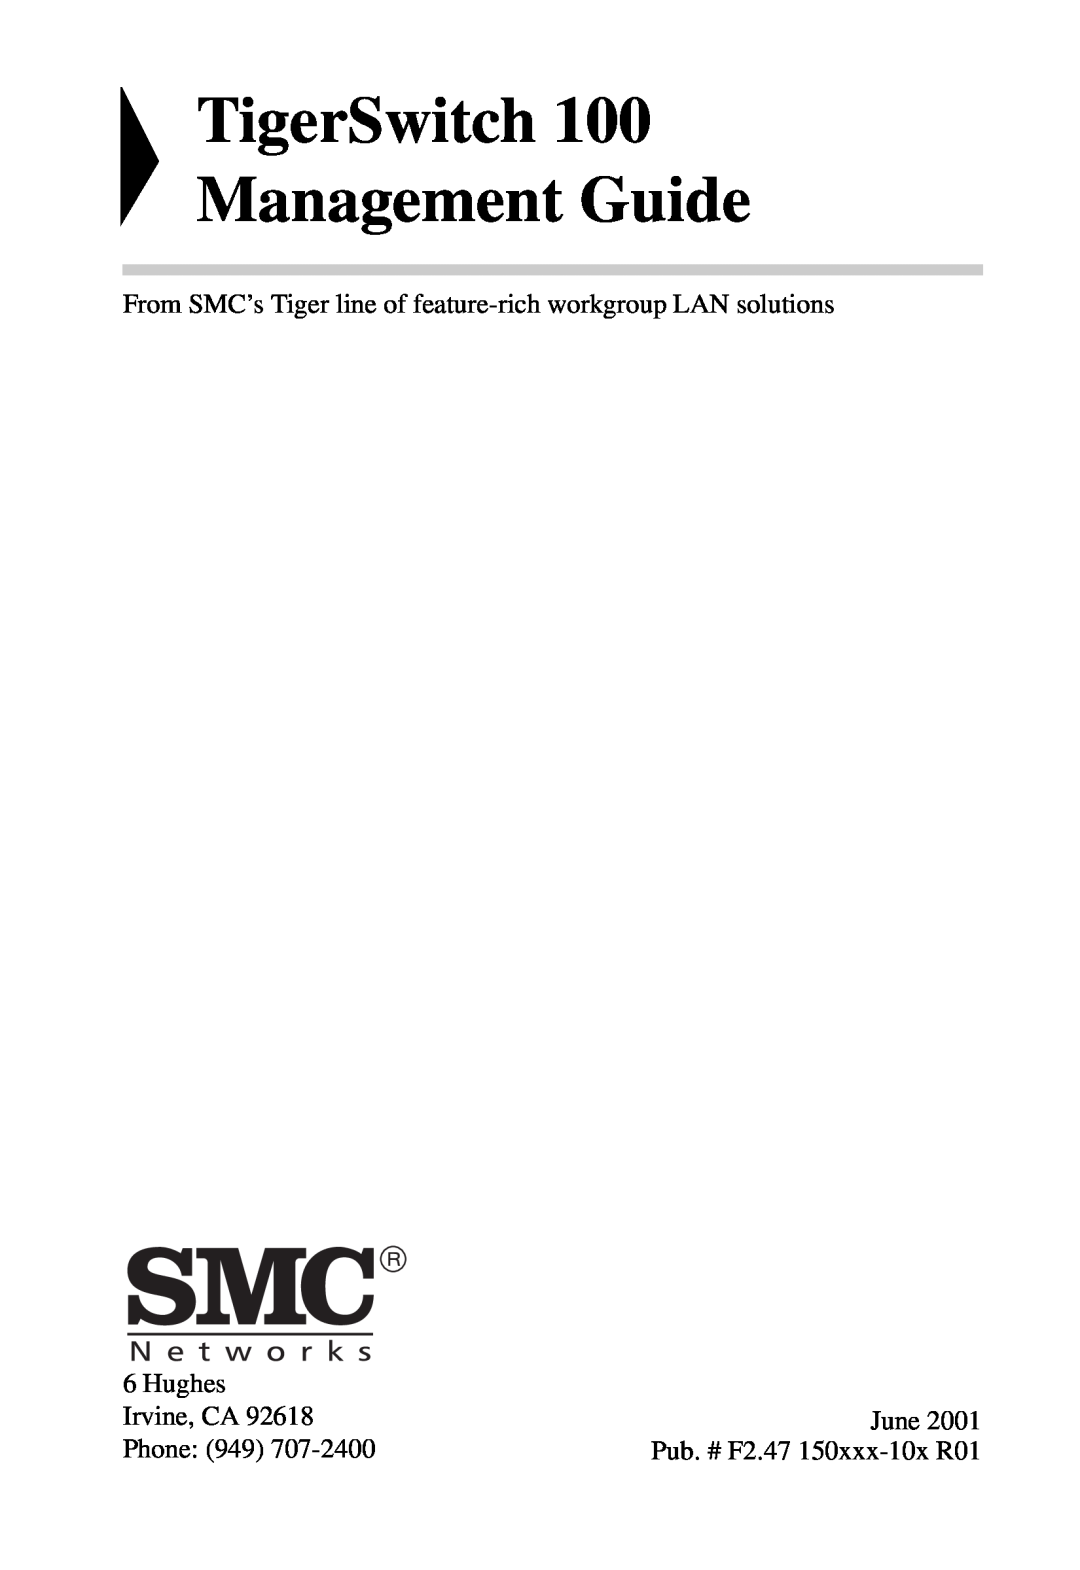 SMC Networks SMC6924VF TigerSwitch 100 Management Guide, From SMC’s Tiger line of feature-rich workgroup LAN solutions 